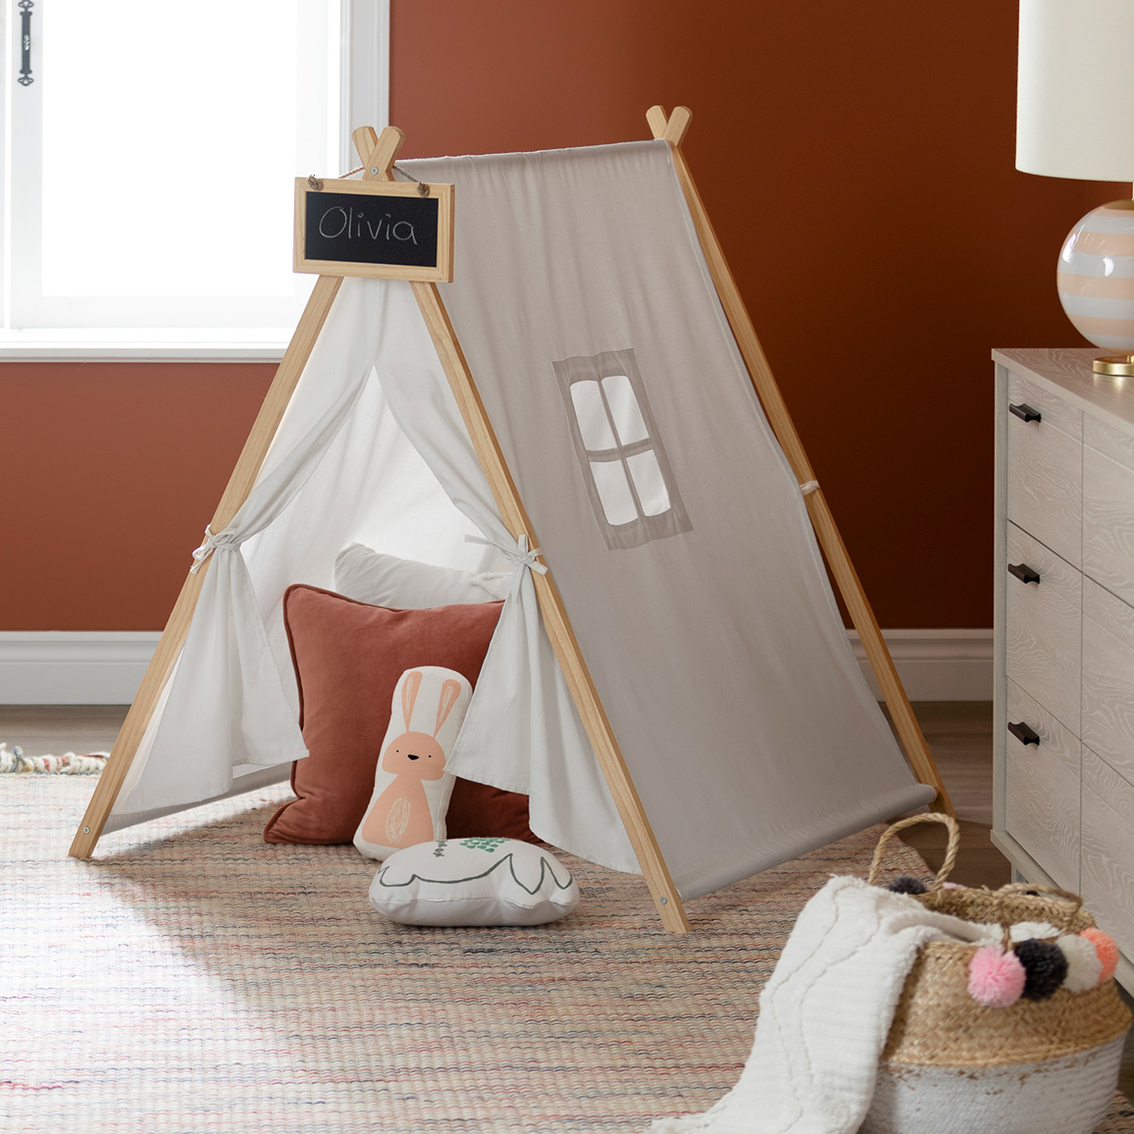 South Shore Sweedi Play Tent with Chalkboard - Image 4 of 10